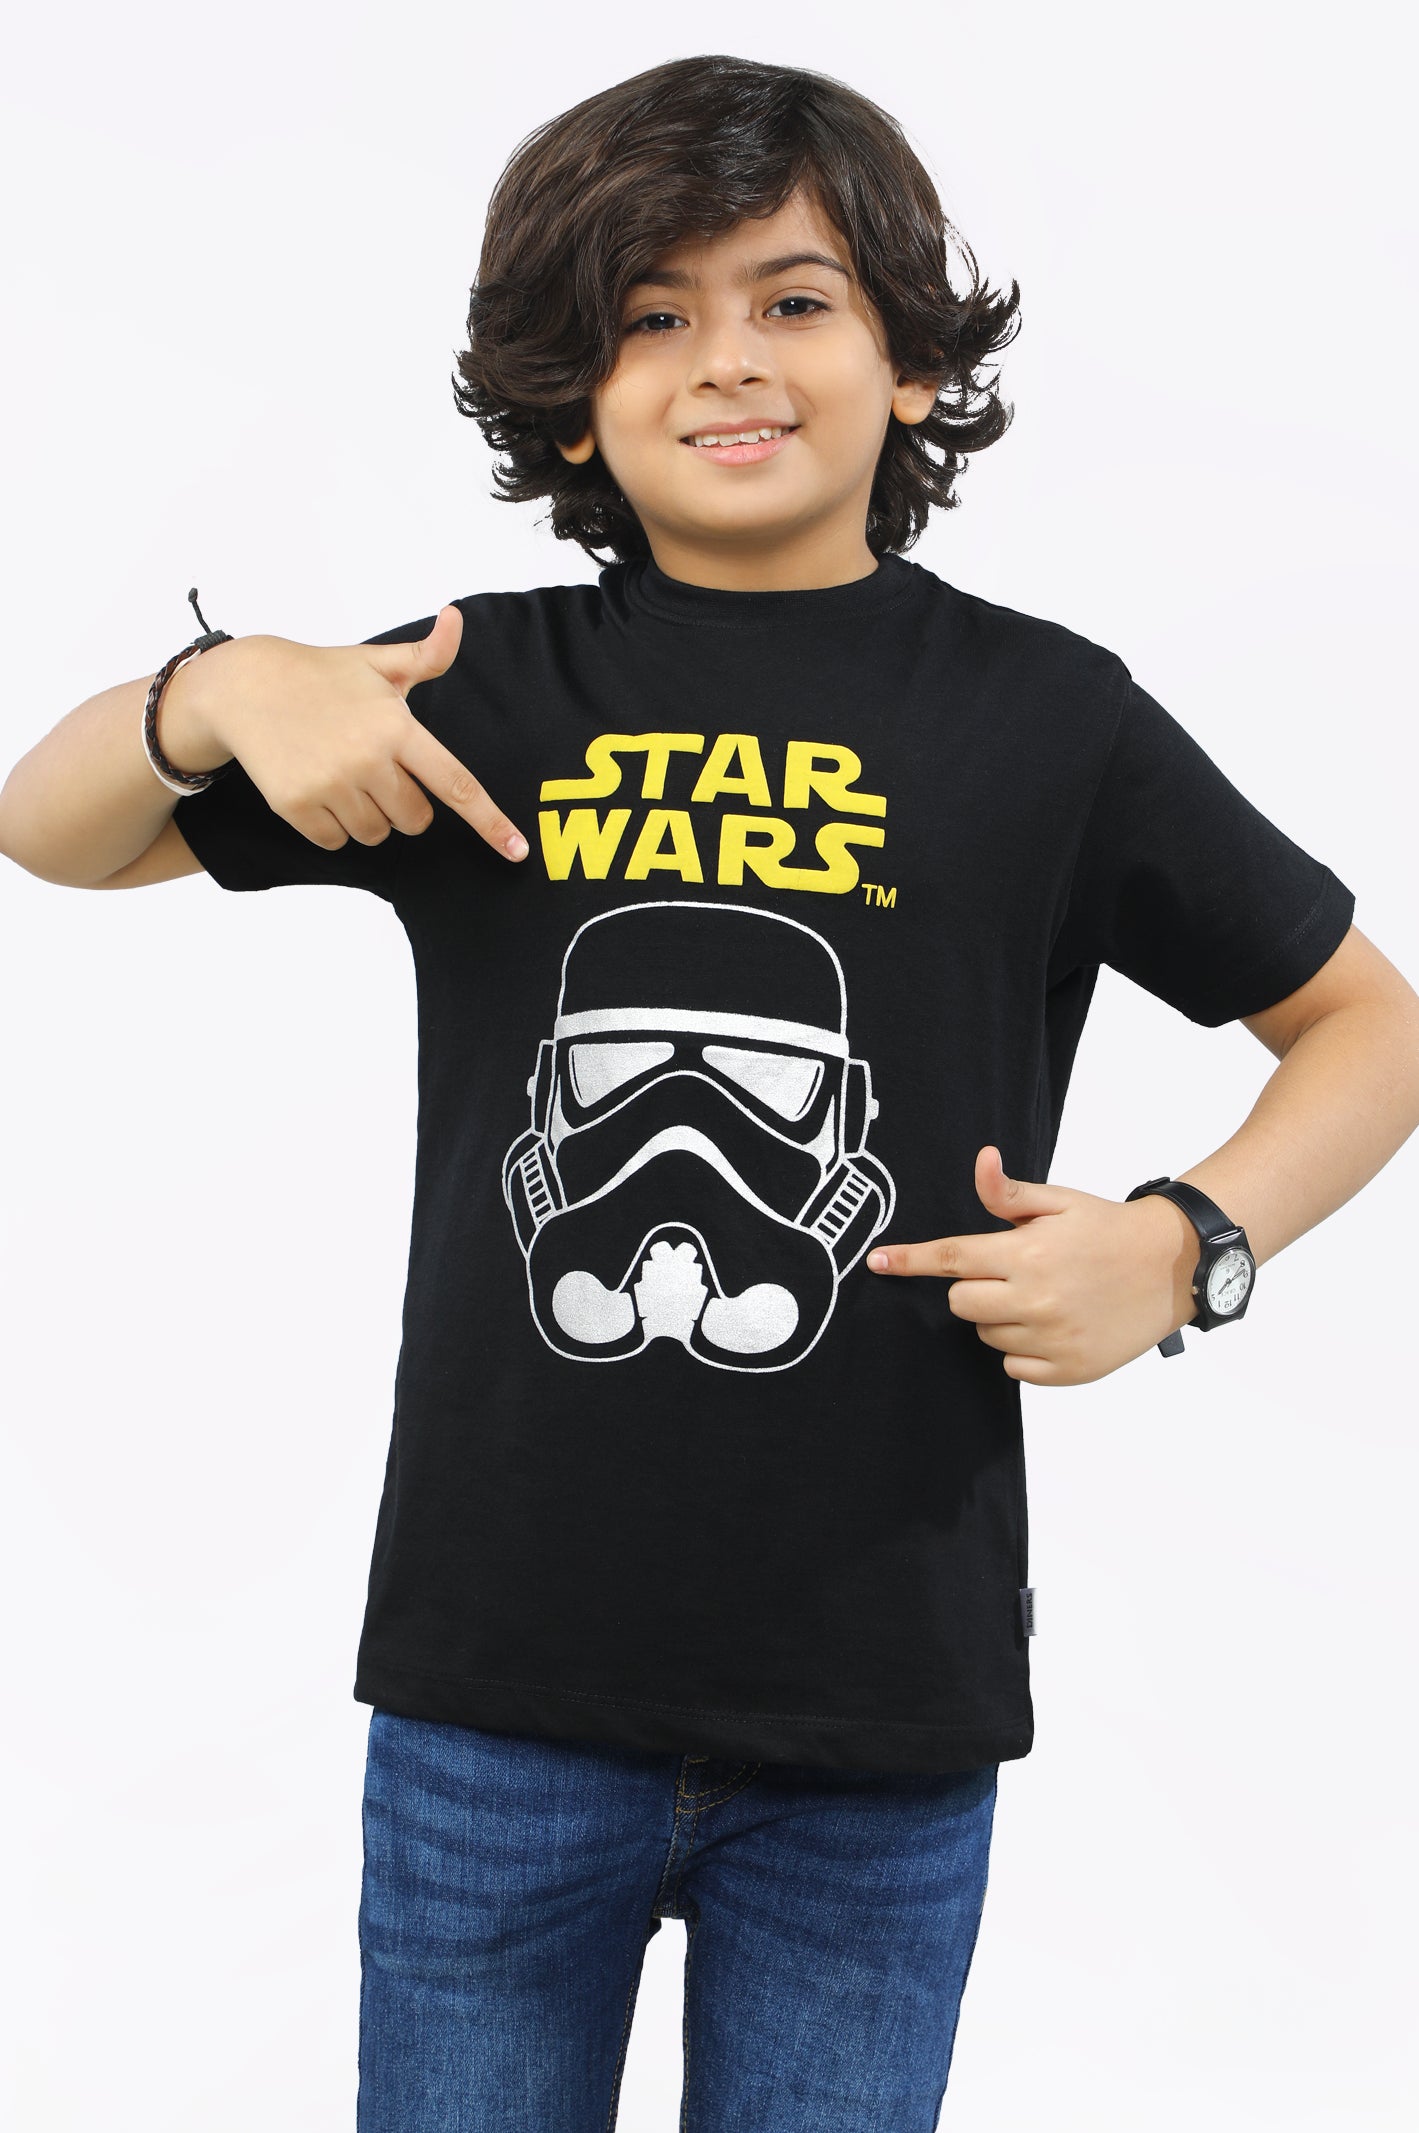 Star Wars Print Tees From Diners